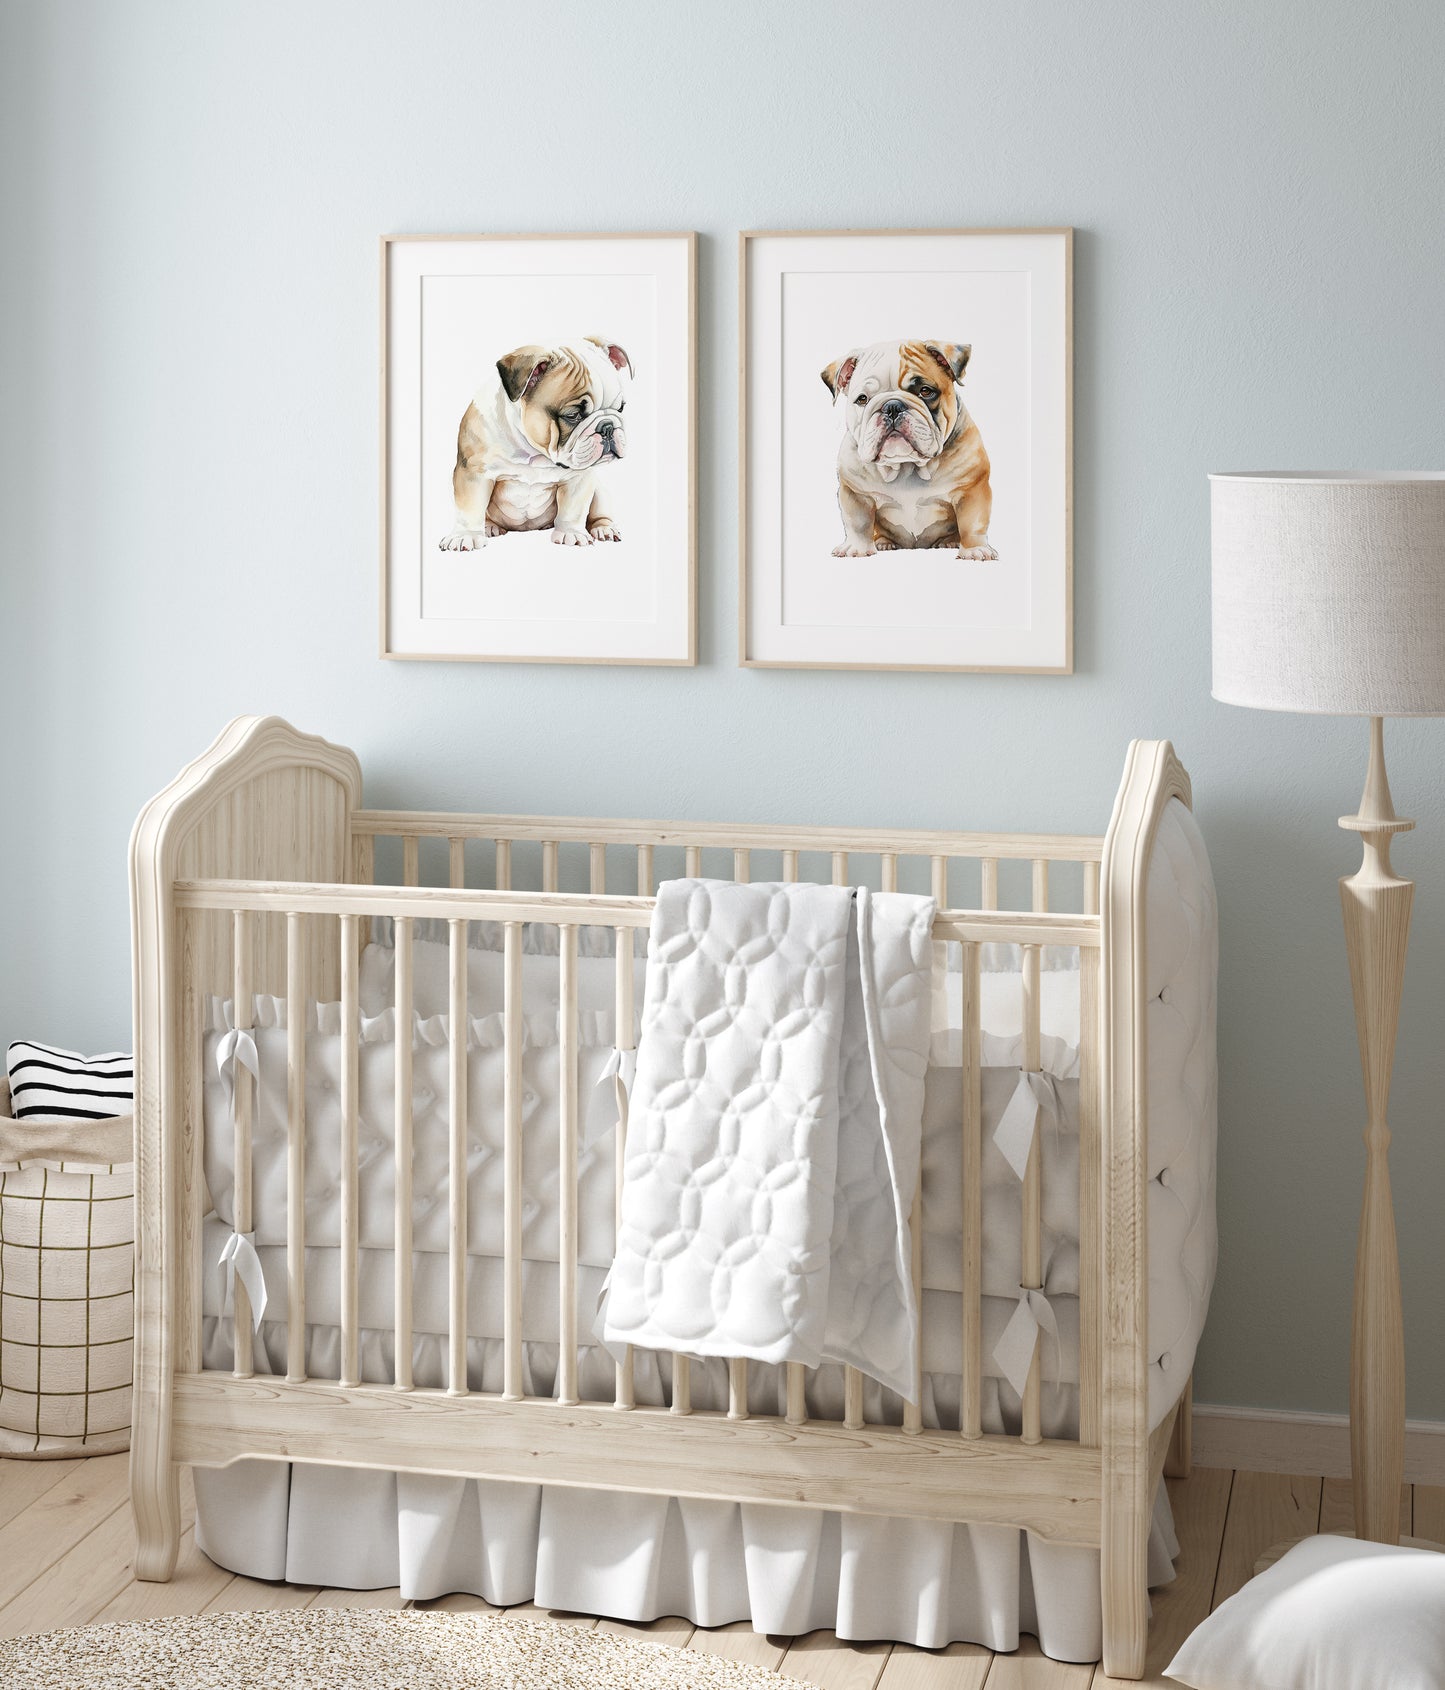 English Bulldog Printable Wall Art, Puppy dogs Nursery Prints Set of 2 - Friends Forever